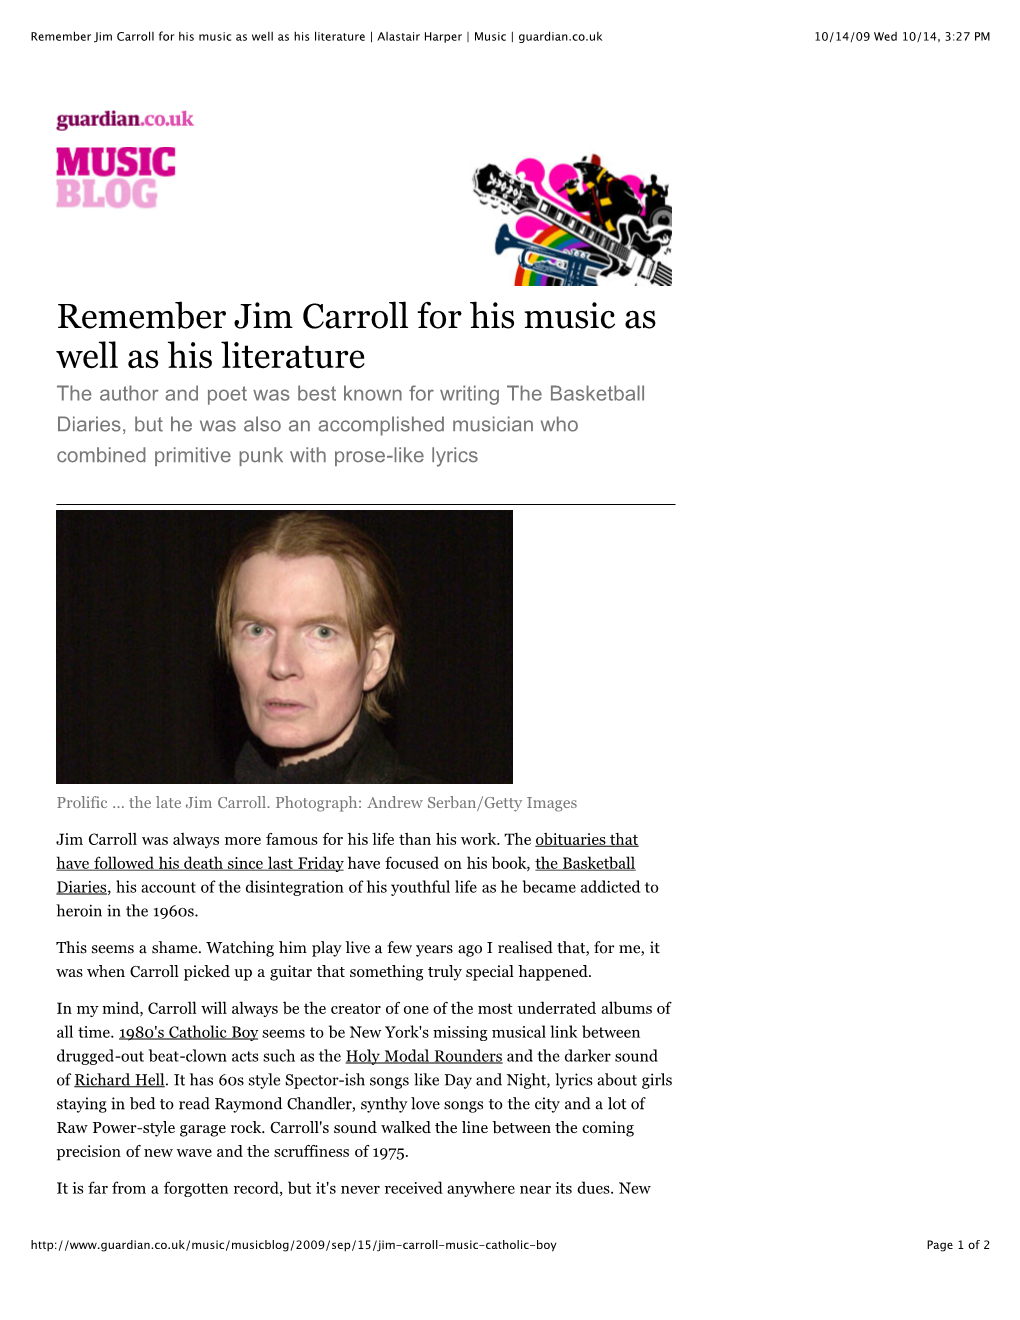 Remember Jim Carroll for His Music As Well As His Literature | Alastair Harper | Music | Guardian.Co.Uk 10/14/09 Wed 10/14, 3:27 PM